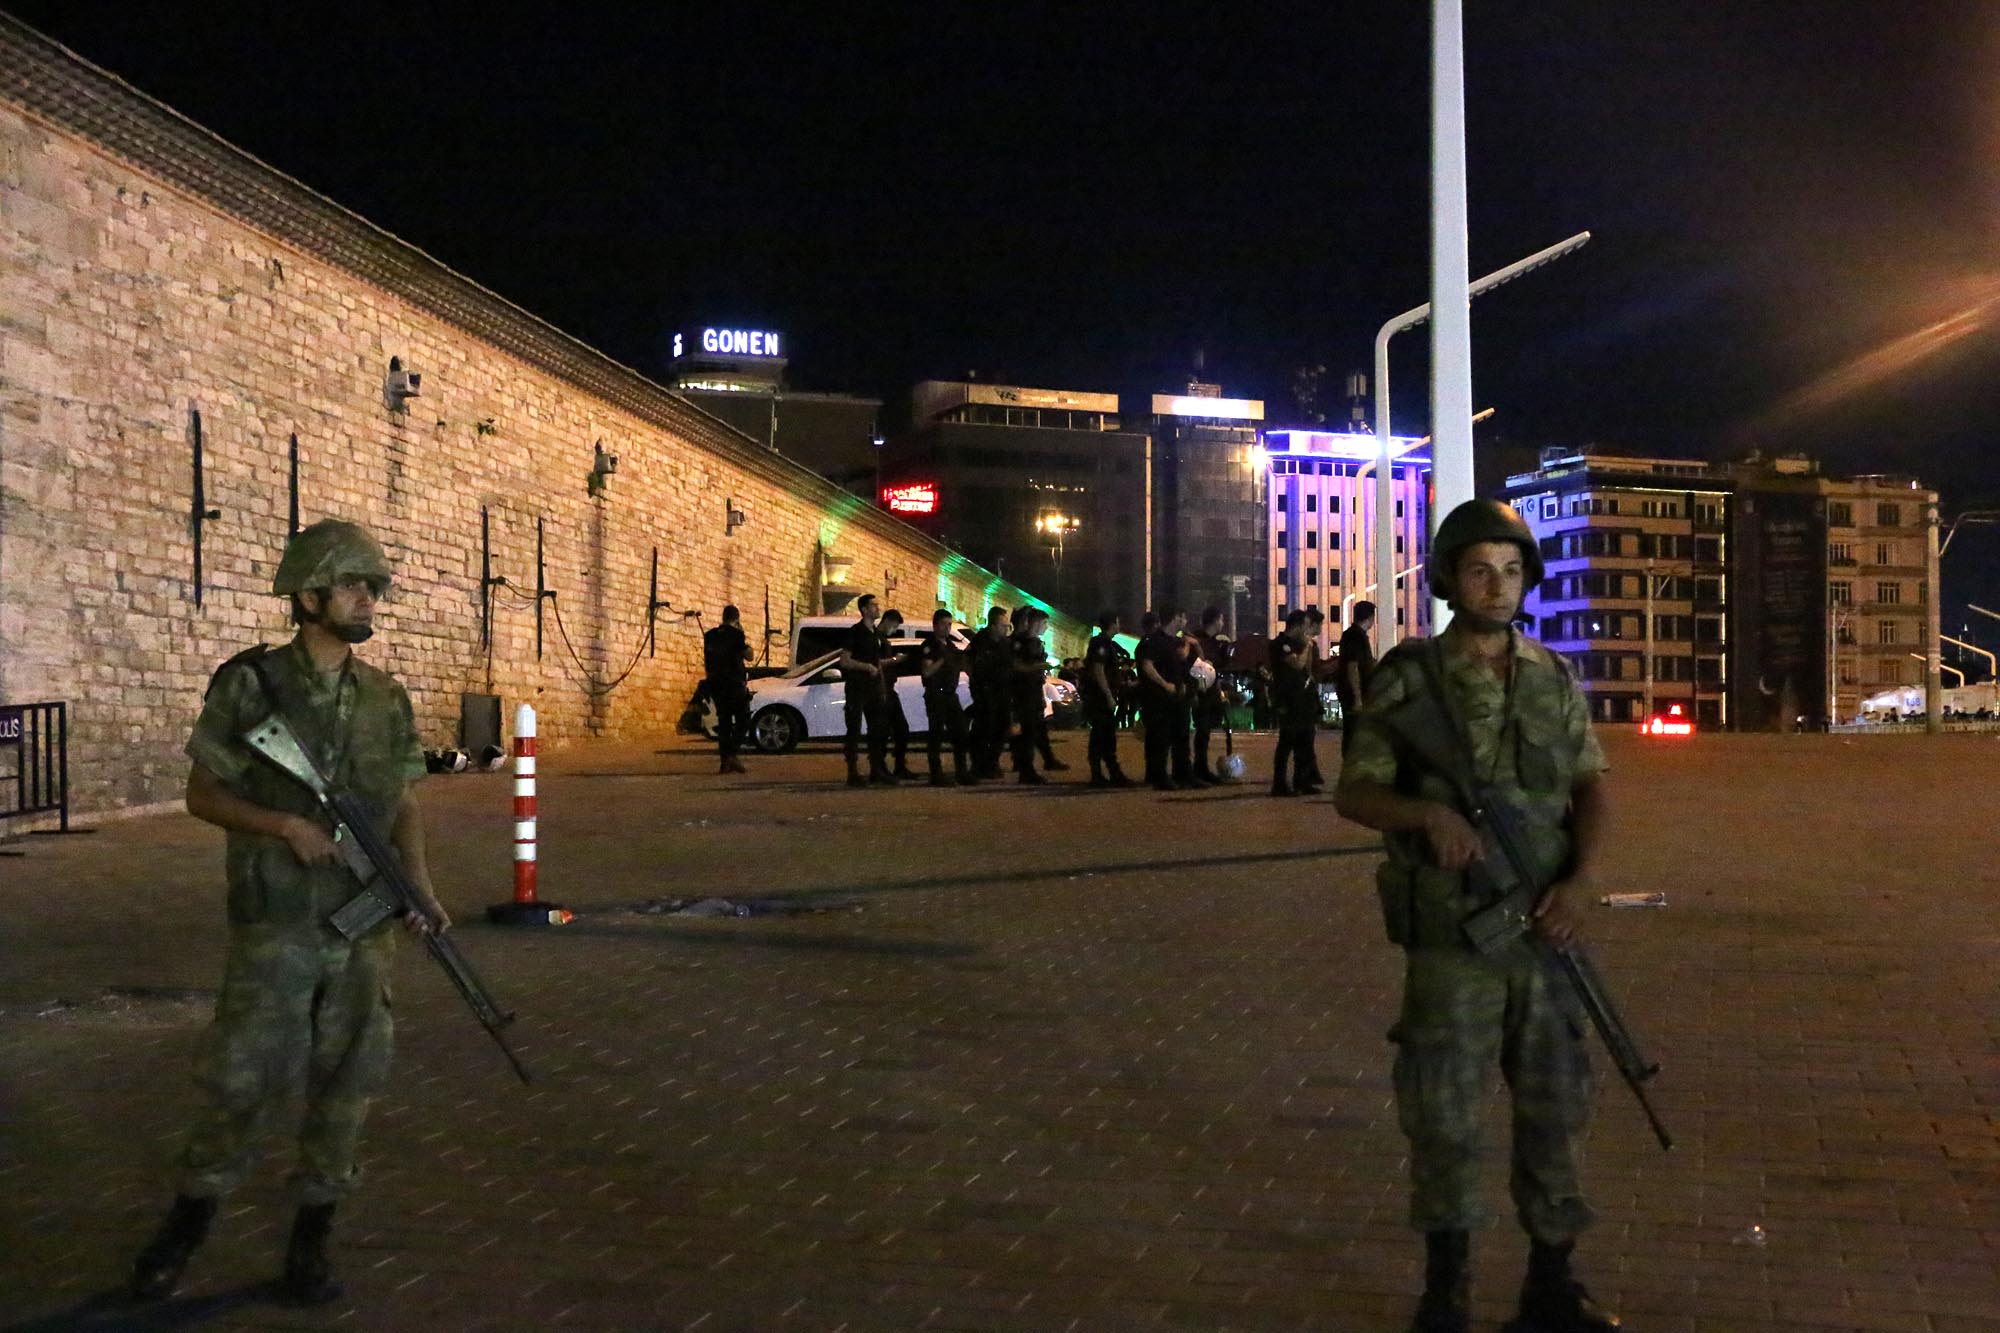 Coup soldiers in Taksim Square started gathering around the Republic Memorial.